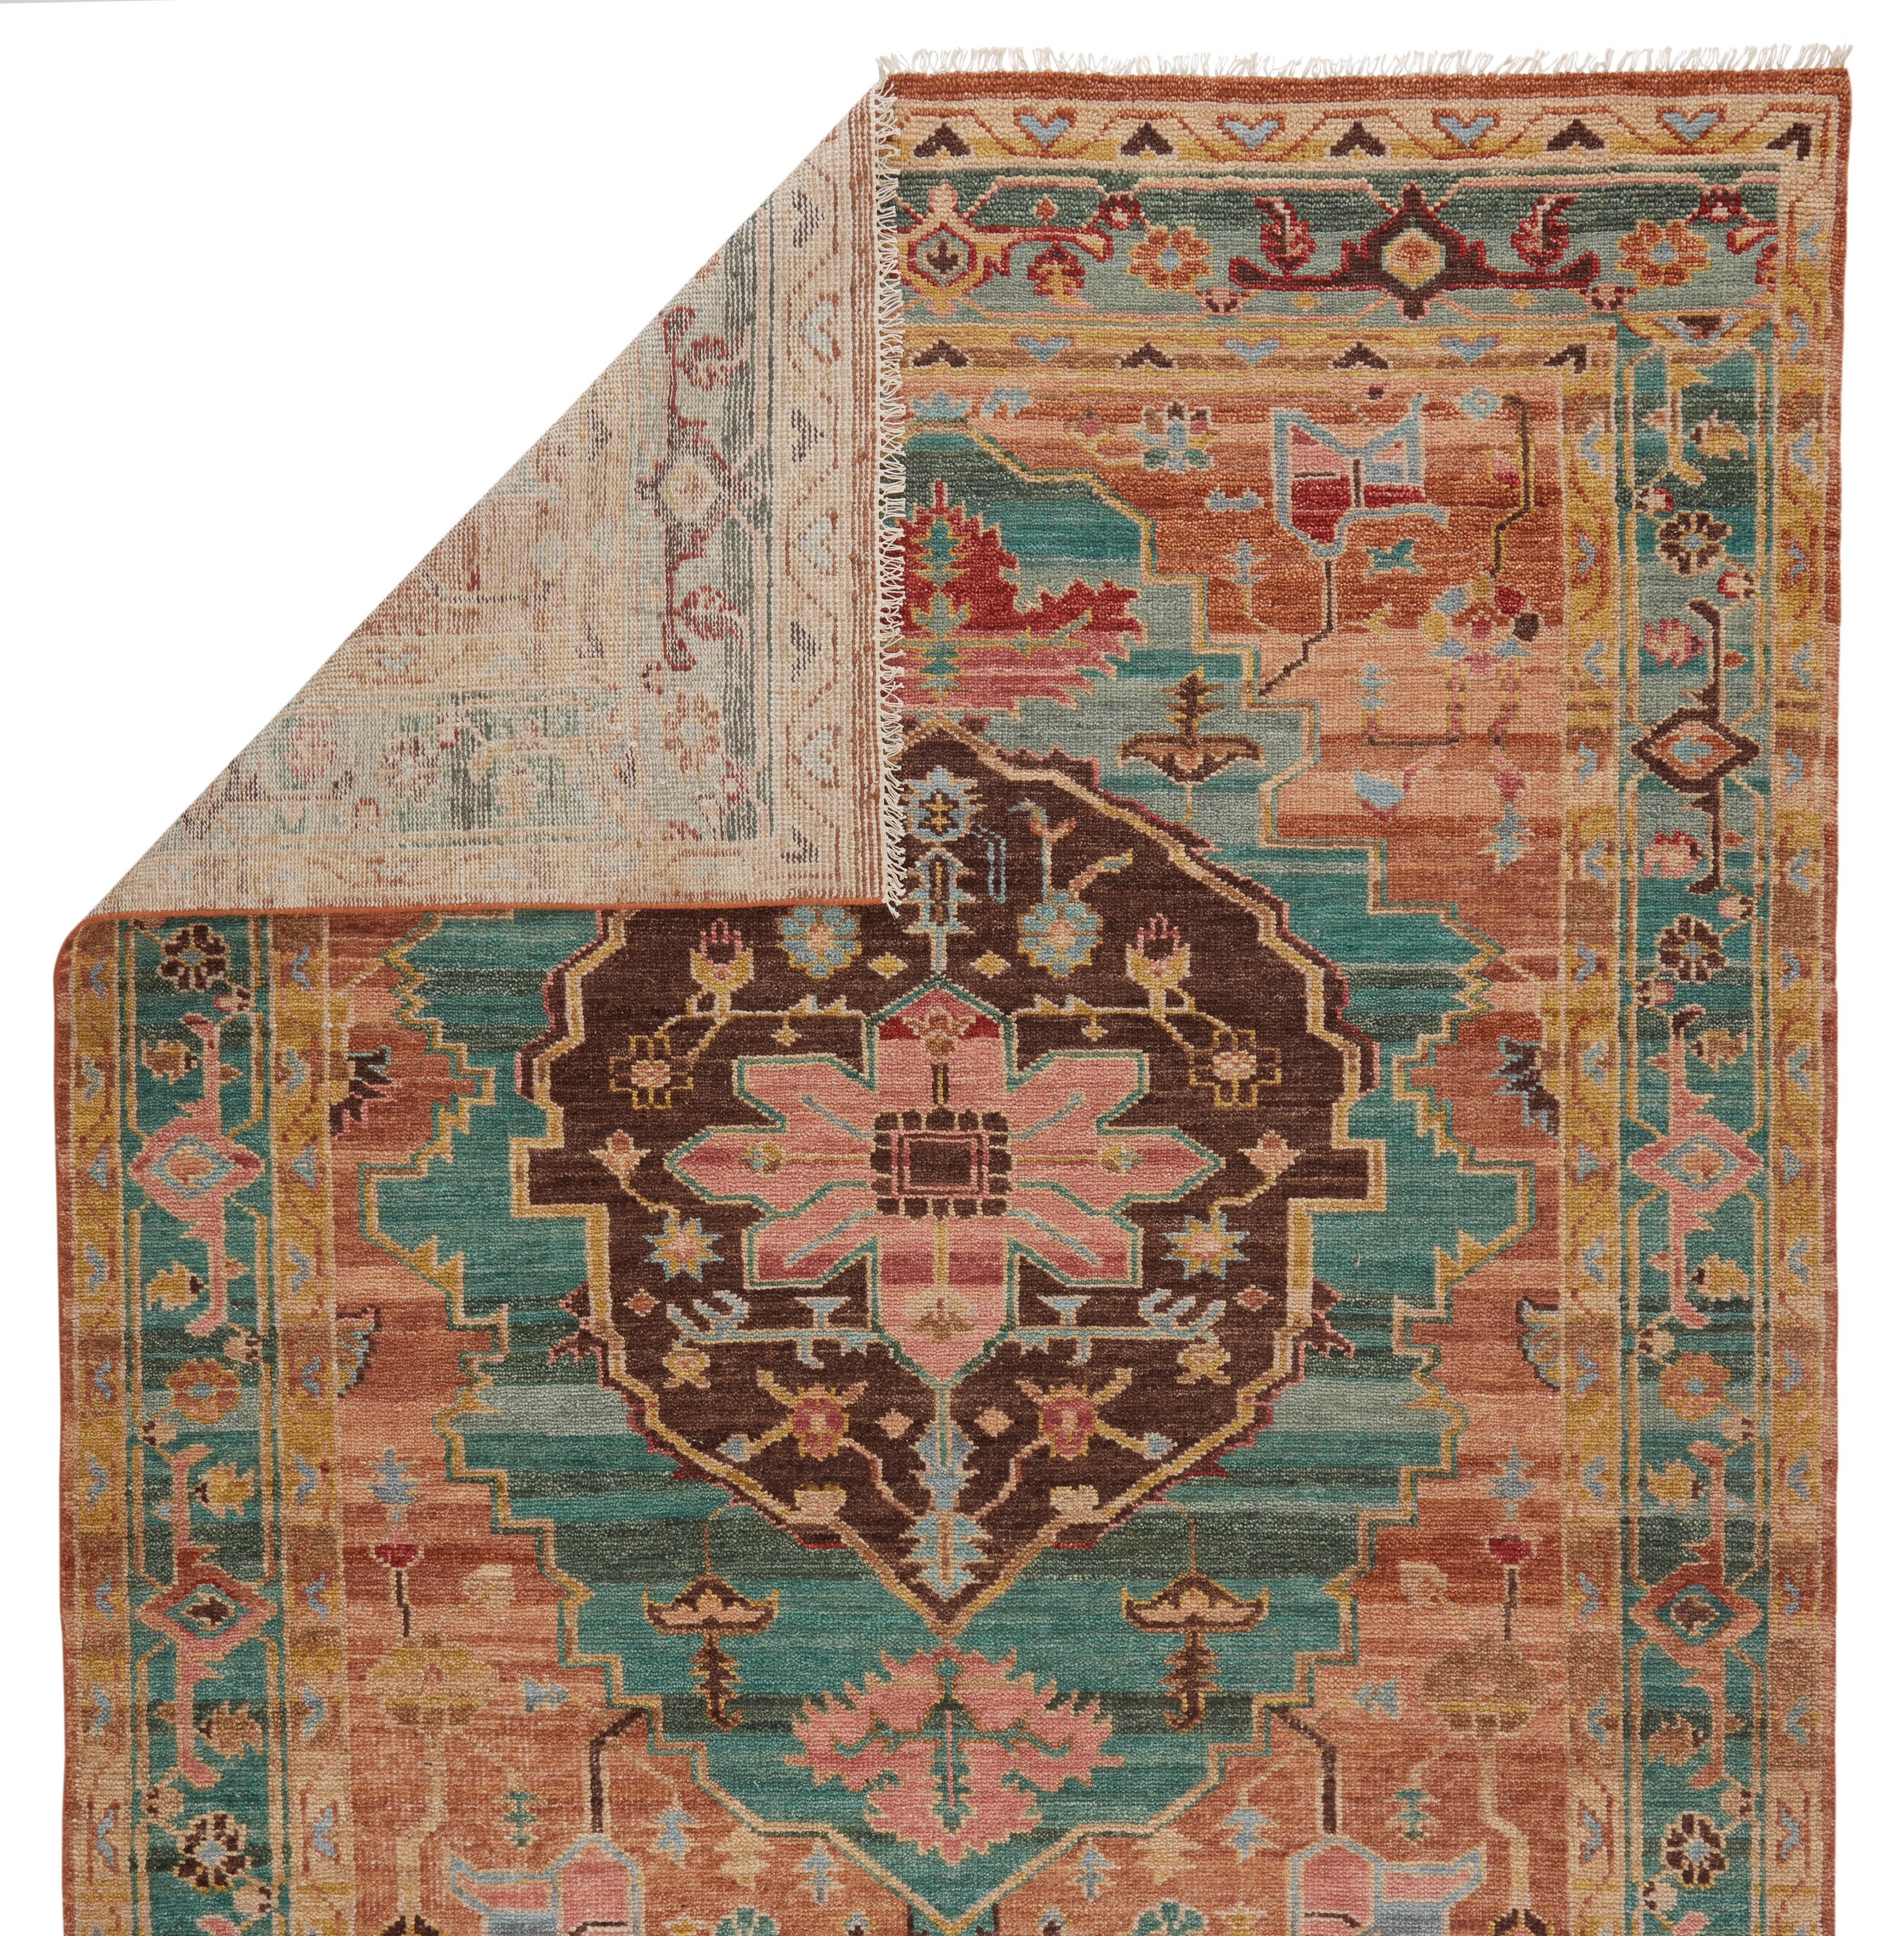 Jude Hand-Knotted Medallion Teal/ Dark Blush Area Rug (6'X9') - Image 2